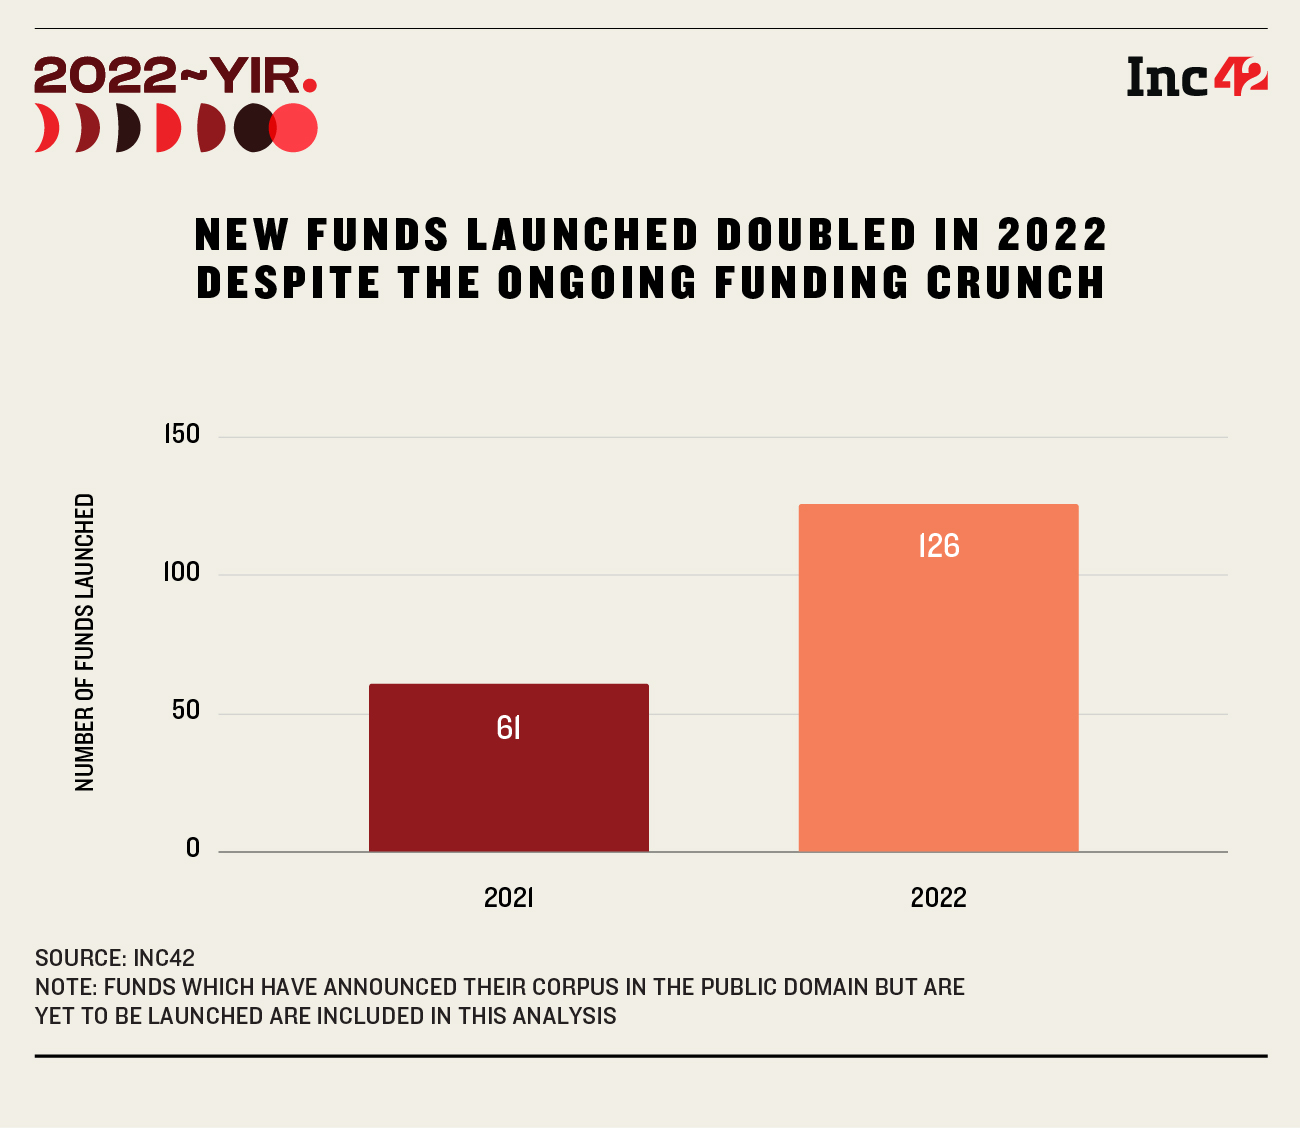 Despite Funding Winter, 126 Funds With $18.3 Bn Investment Commitment Launched In 2022